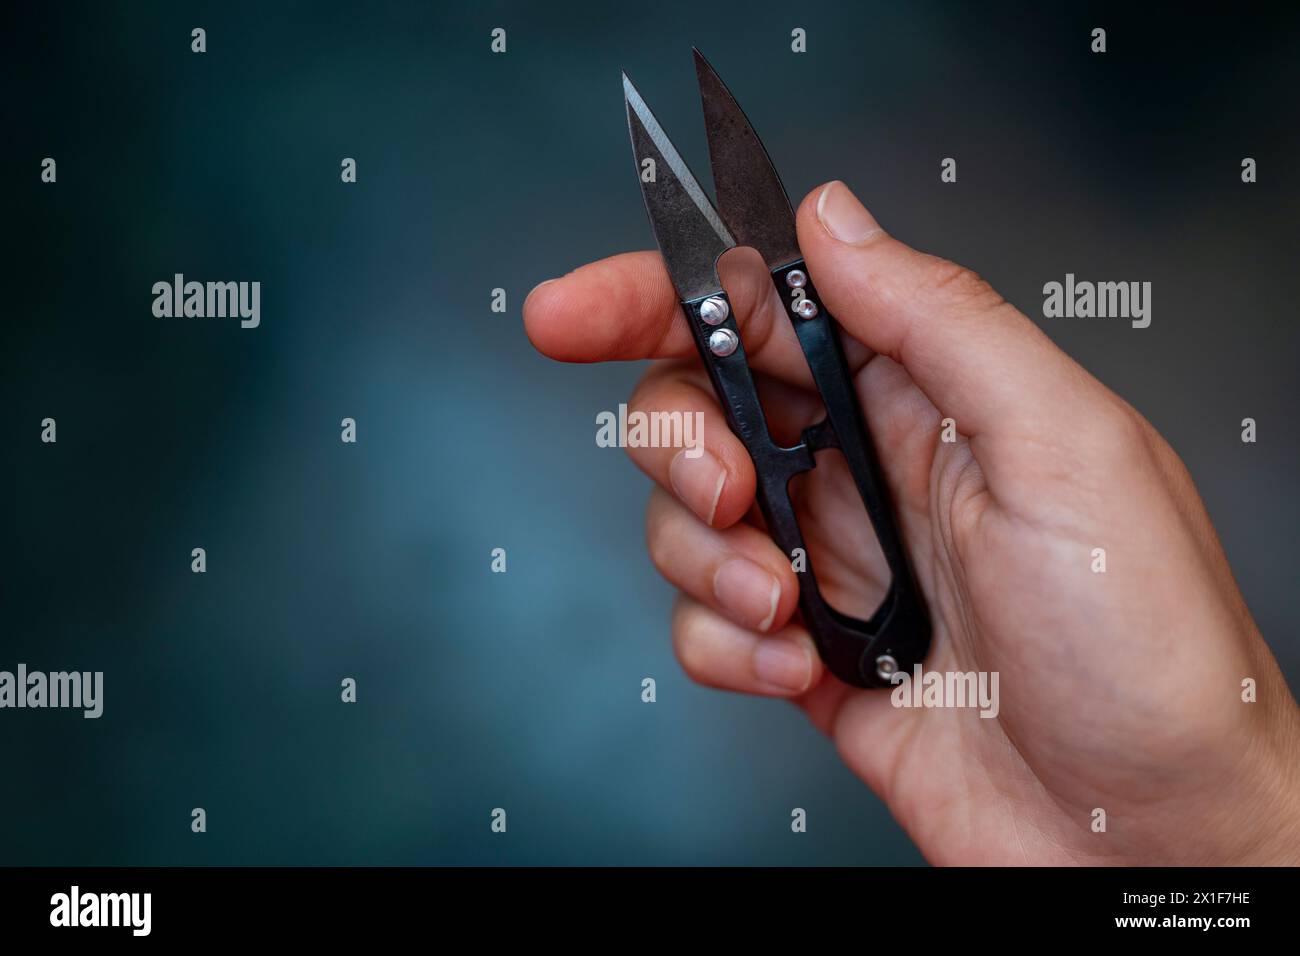 Hands showing a scissors used in sewing Stock Photo